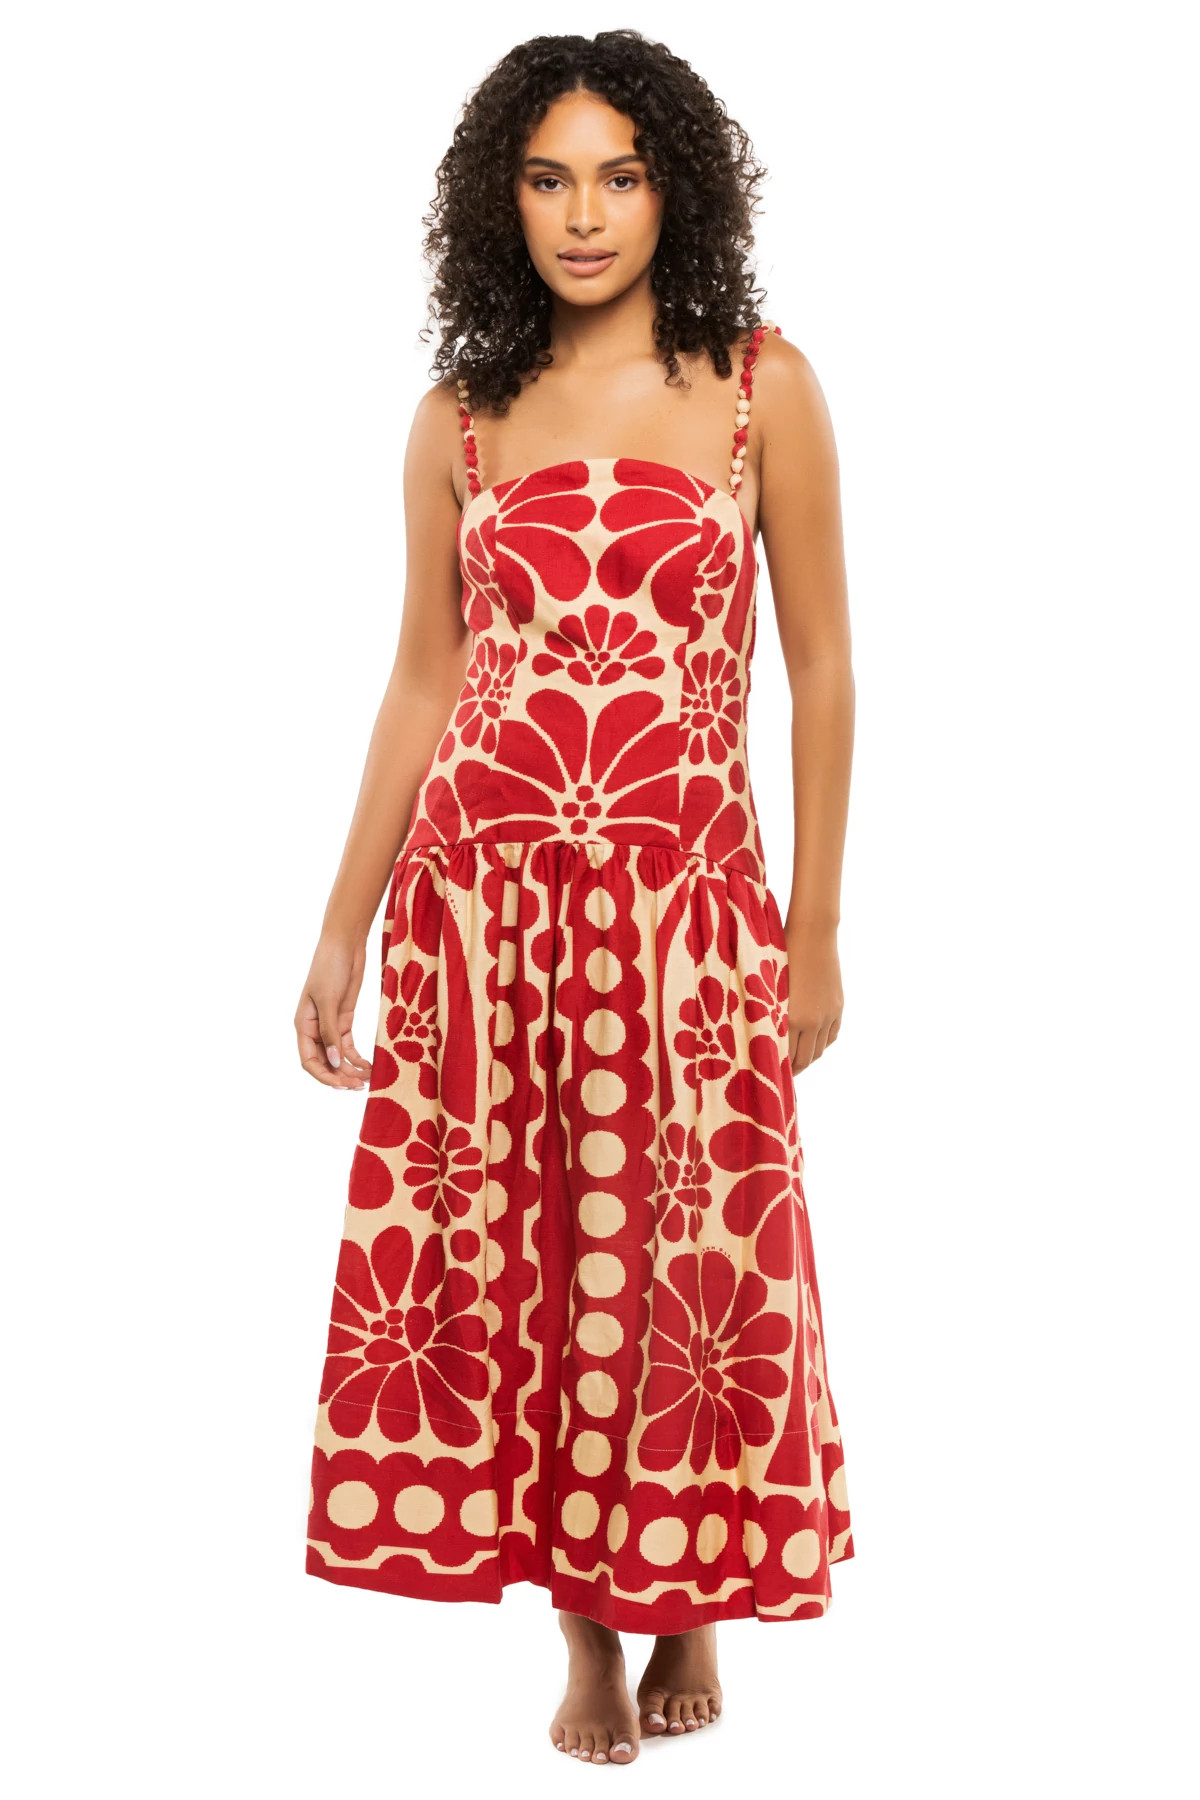 PALERMO RED Palermo Red Midi Dress image number 1